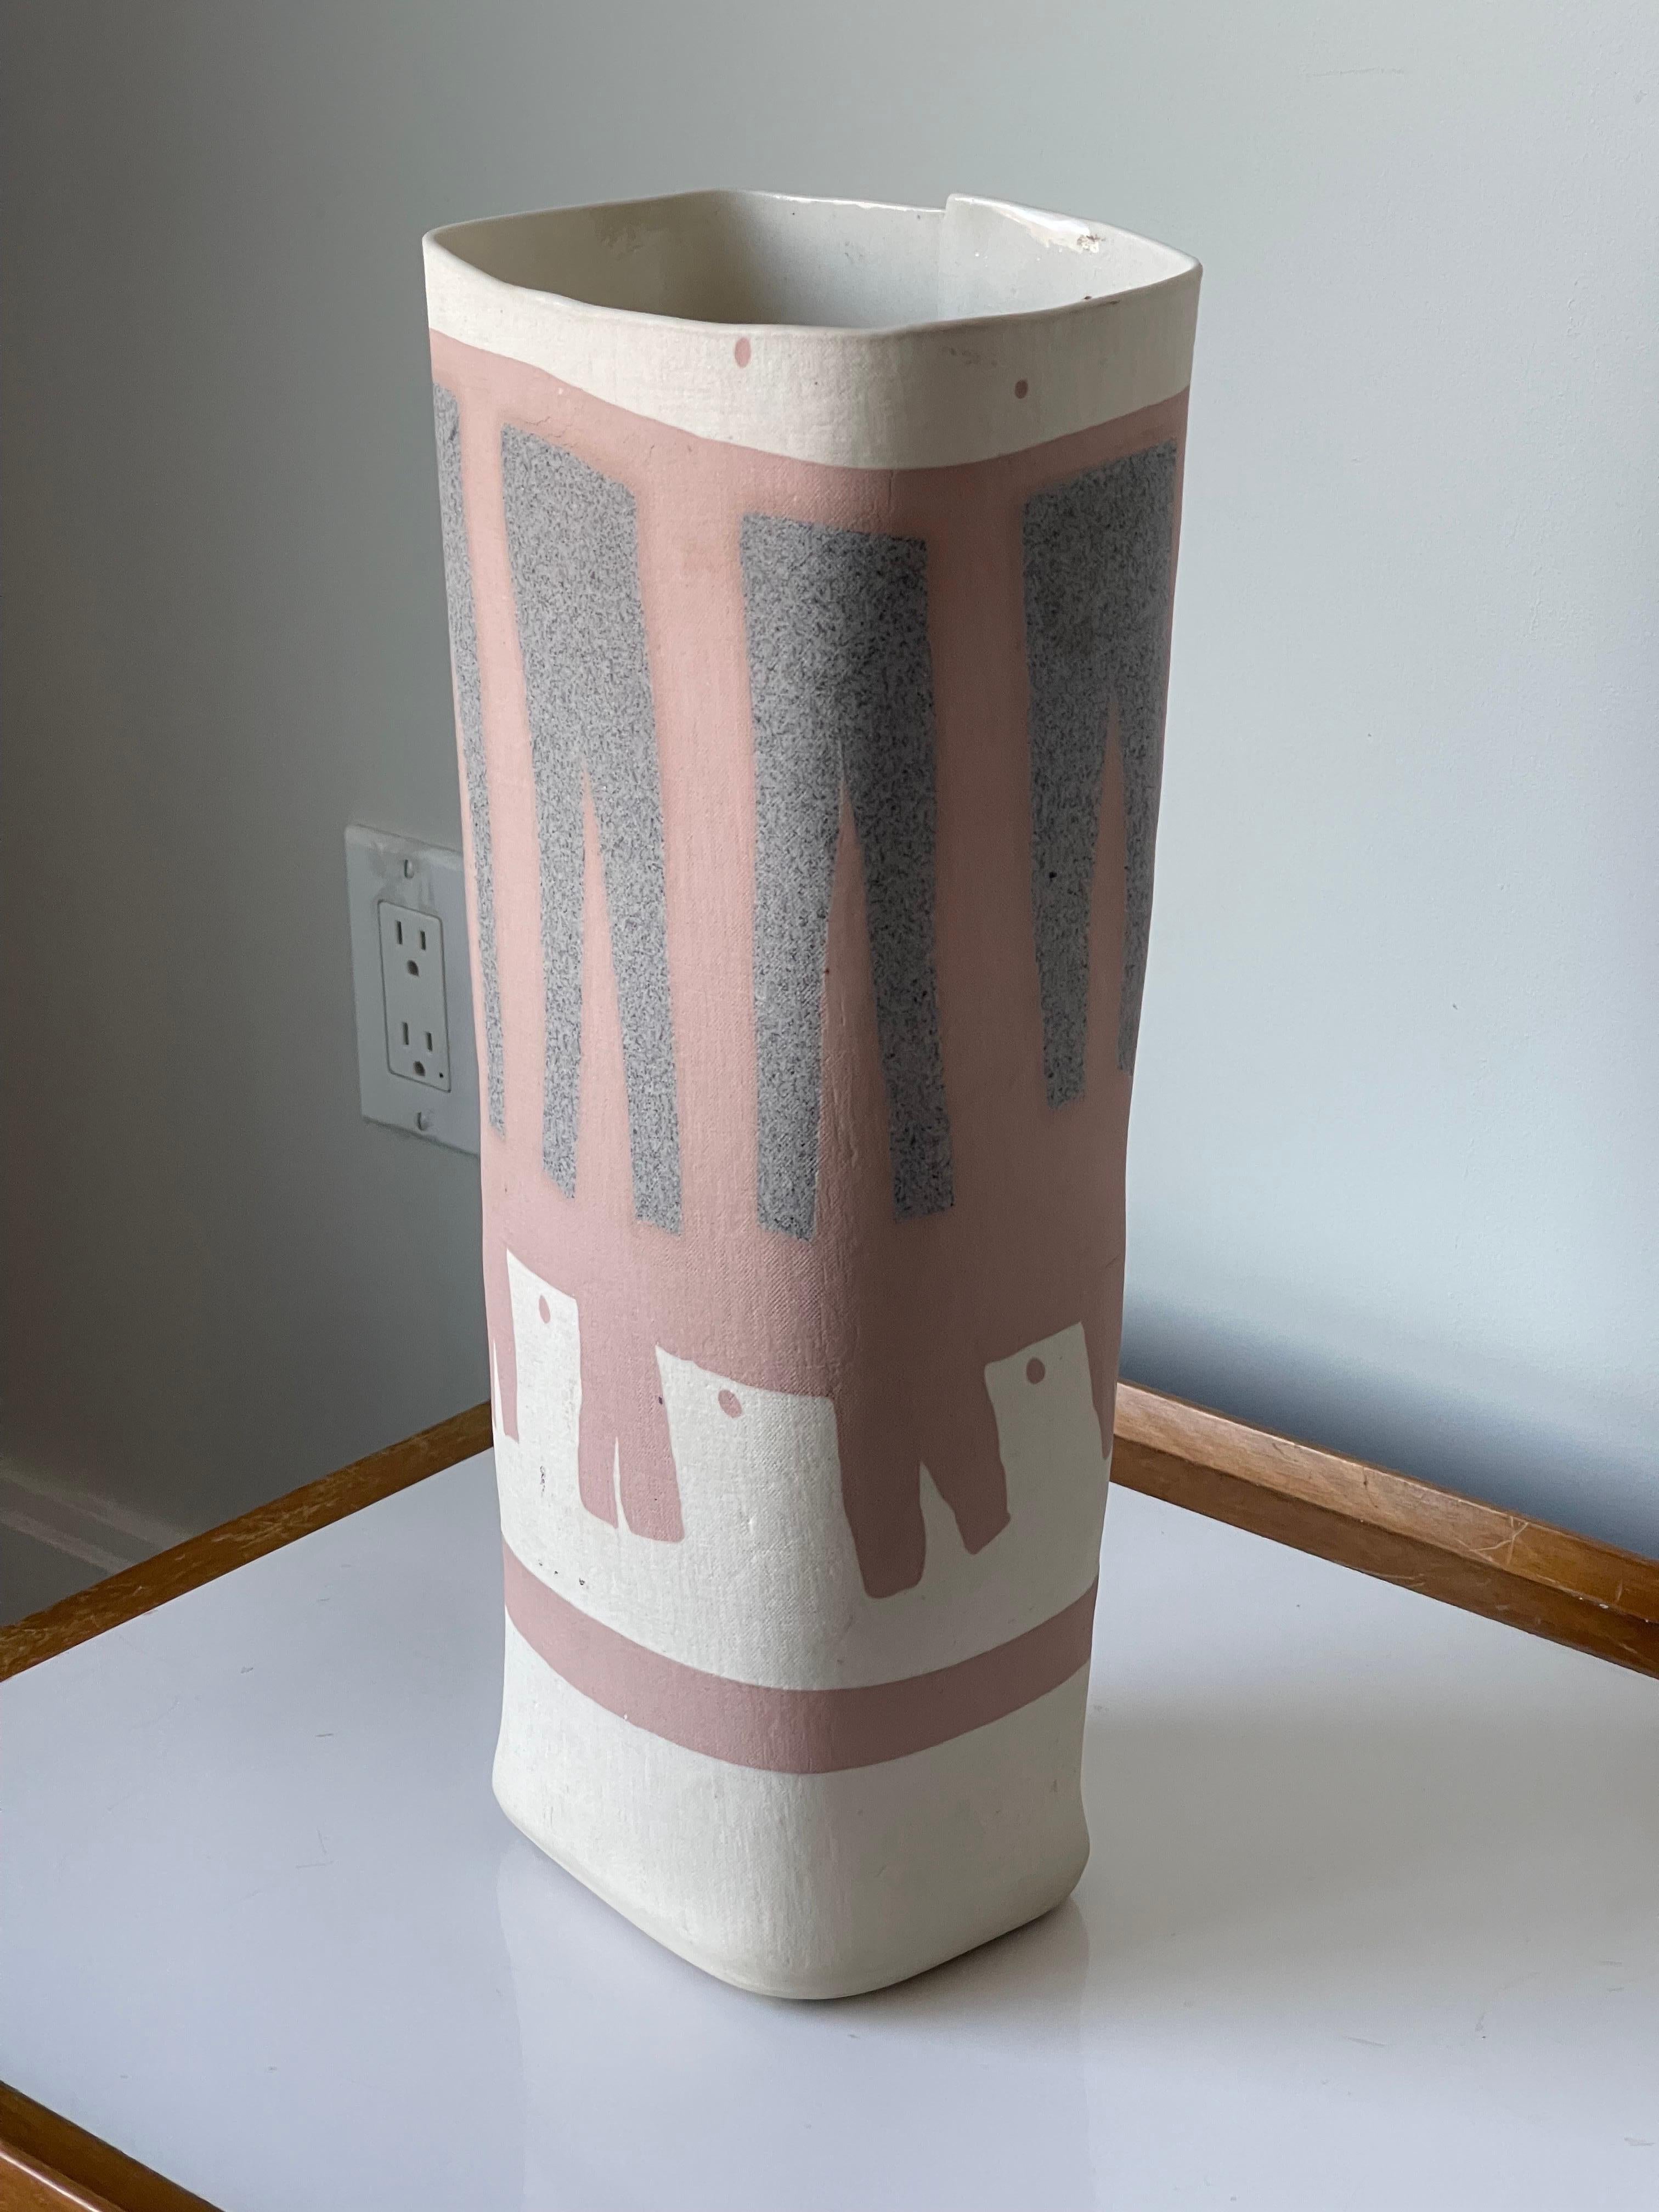 Excellent folded ceramic vase by Weissman, 1982. 
From a collection of an architect / artist in Massachusetts. 
They traveled extensively throughout California, Arizona and New Mexico, buying art. Many listed artists were in their collection.